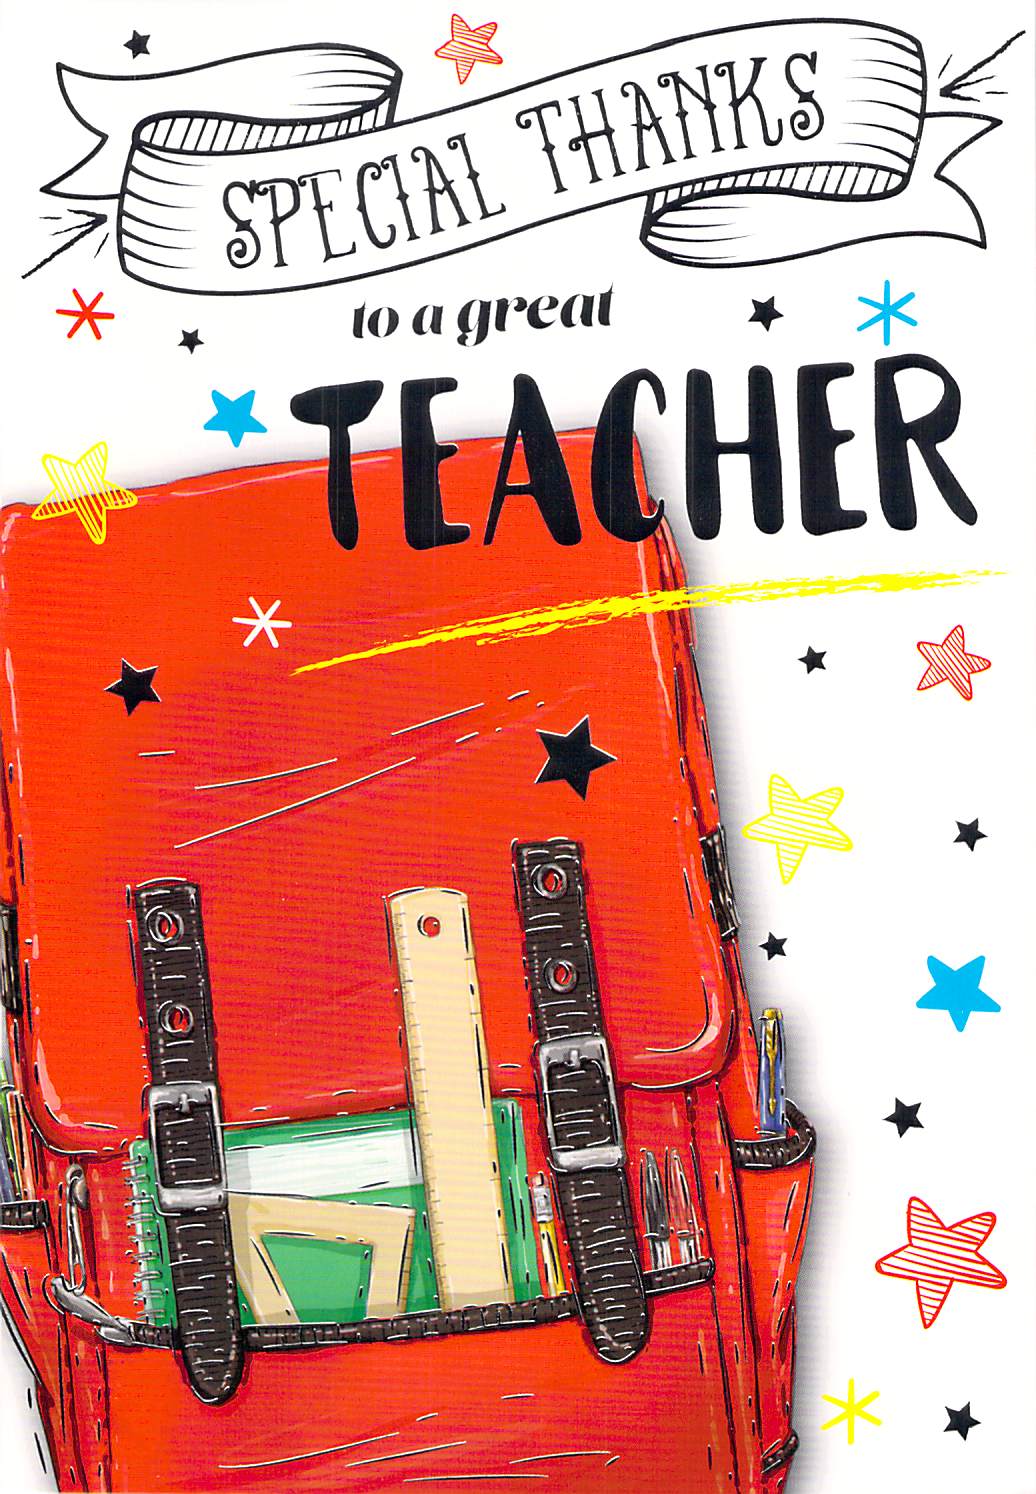 Thank You To A Great Teacher - Greeting Card - Free Postage